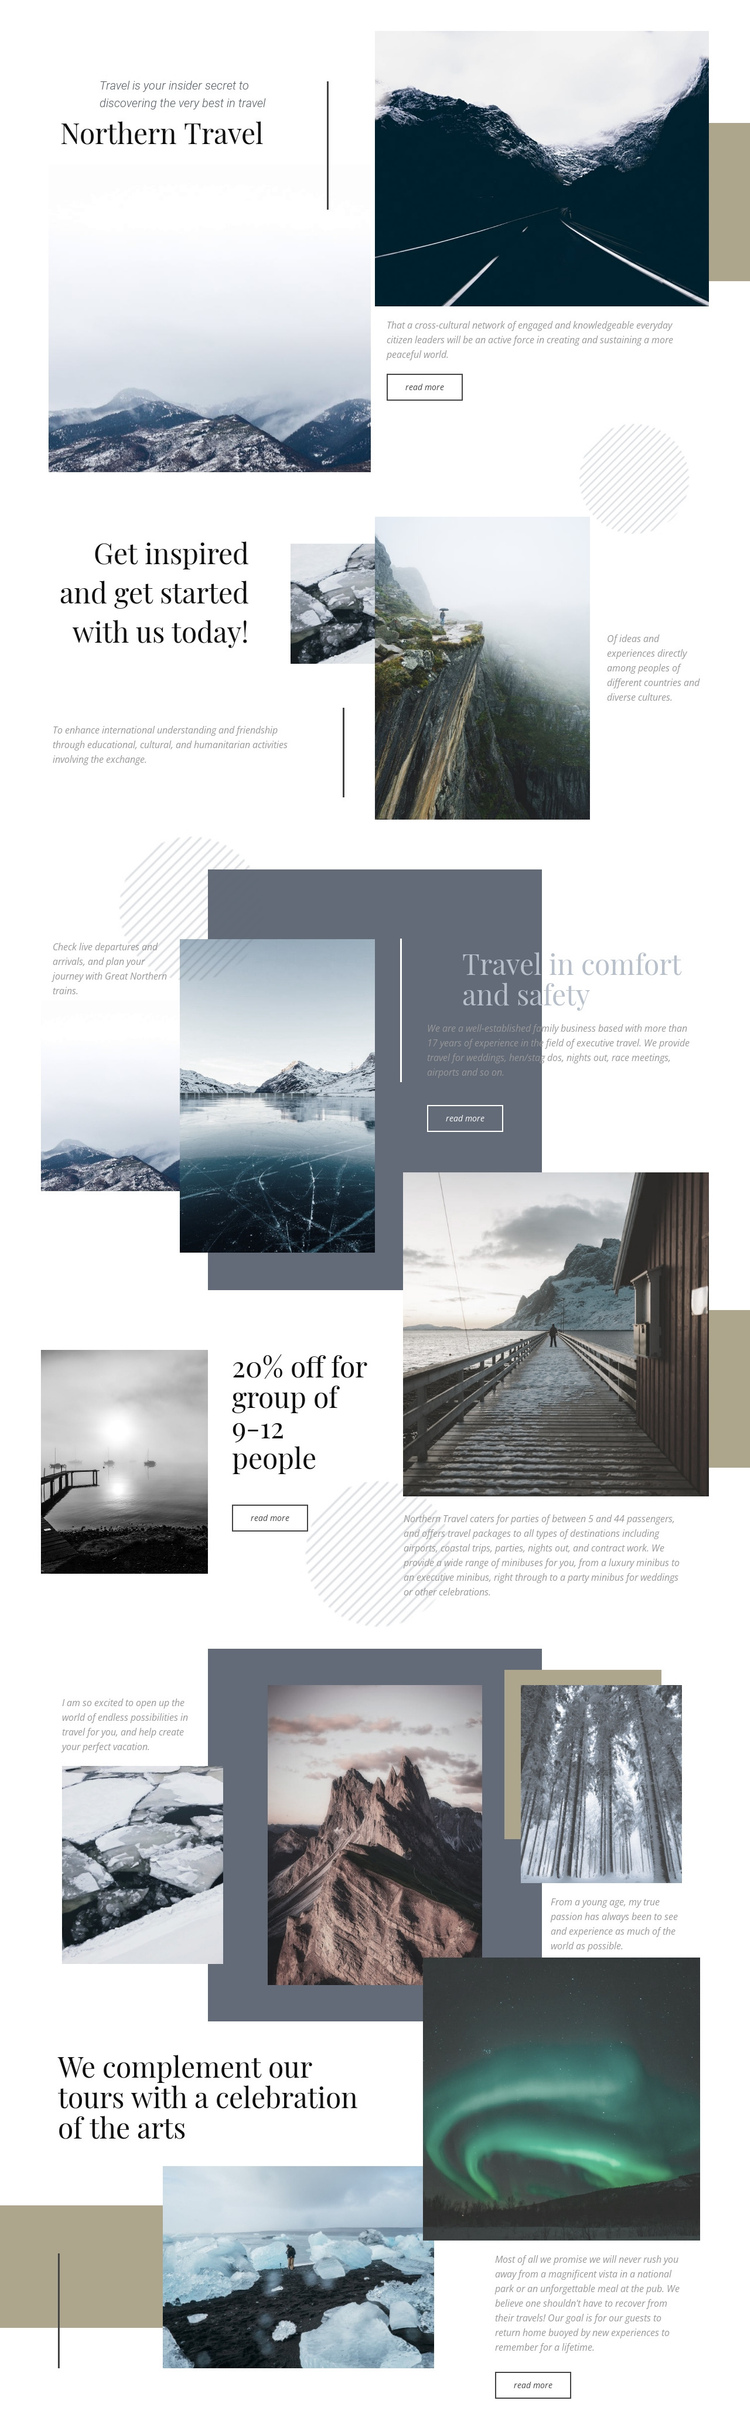 Northern Travel One Page Template